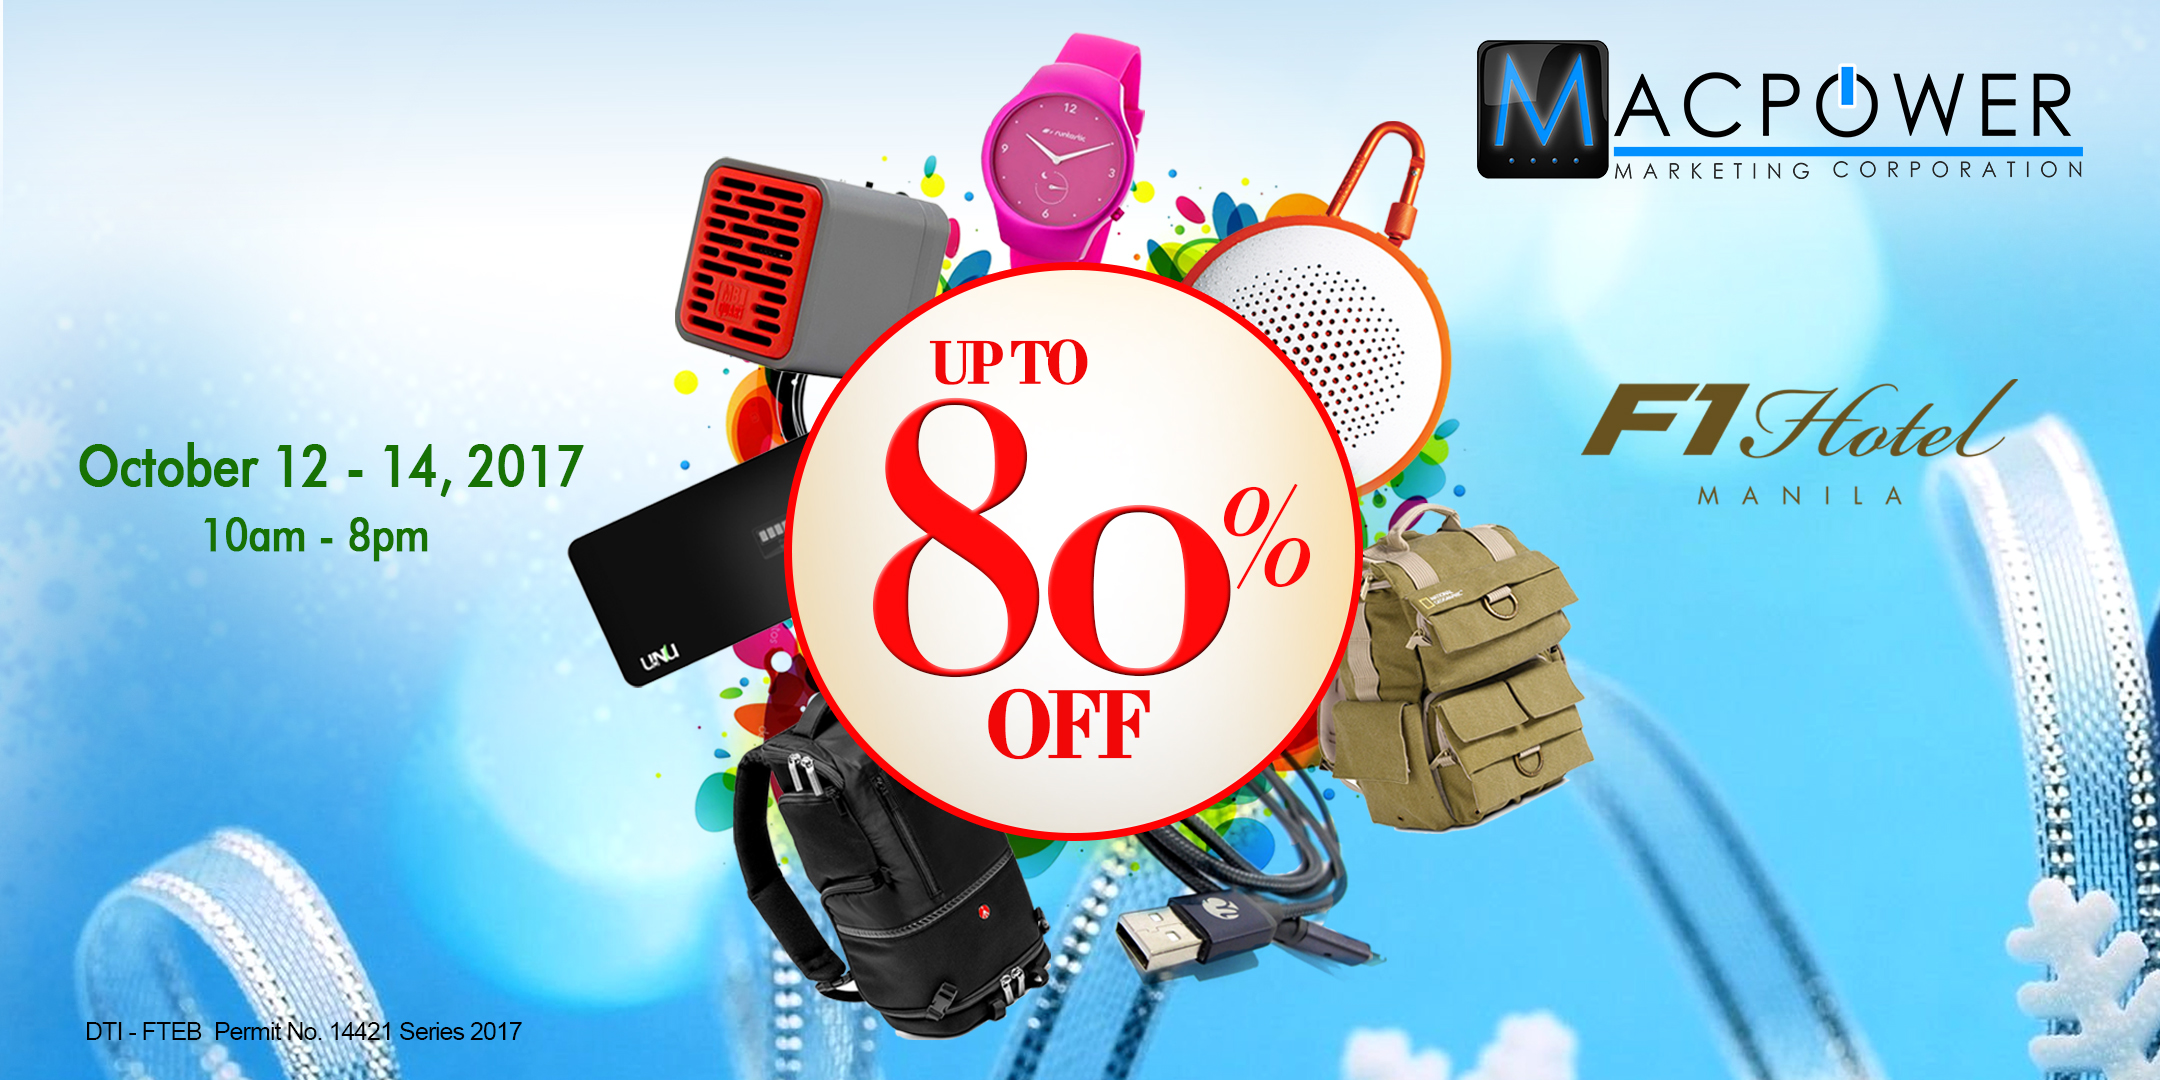 Treat Yourself to Awesome Deals at Macpower’s Pre-Christmas Gadget Sale!